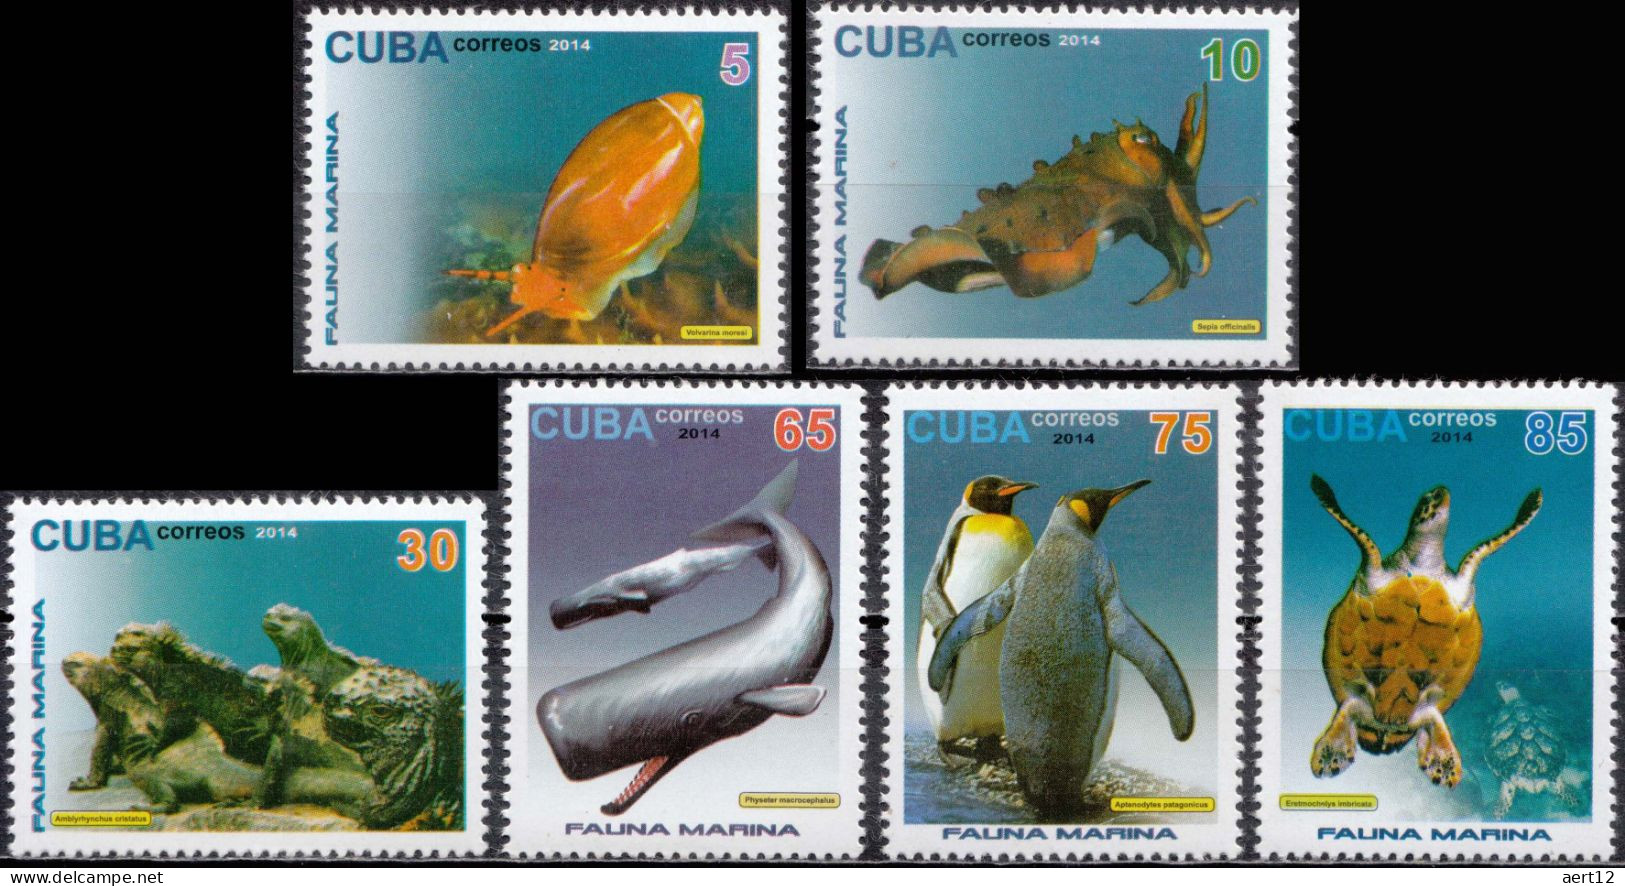 2013, Cuba, Domestic Animals, Birds, Cats, Dogs, Parrots, Pigeons, Rabbits, Reptiles, 6 Stamps, MNH(**), CU 5670-75 - Used Stamps